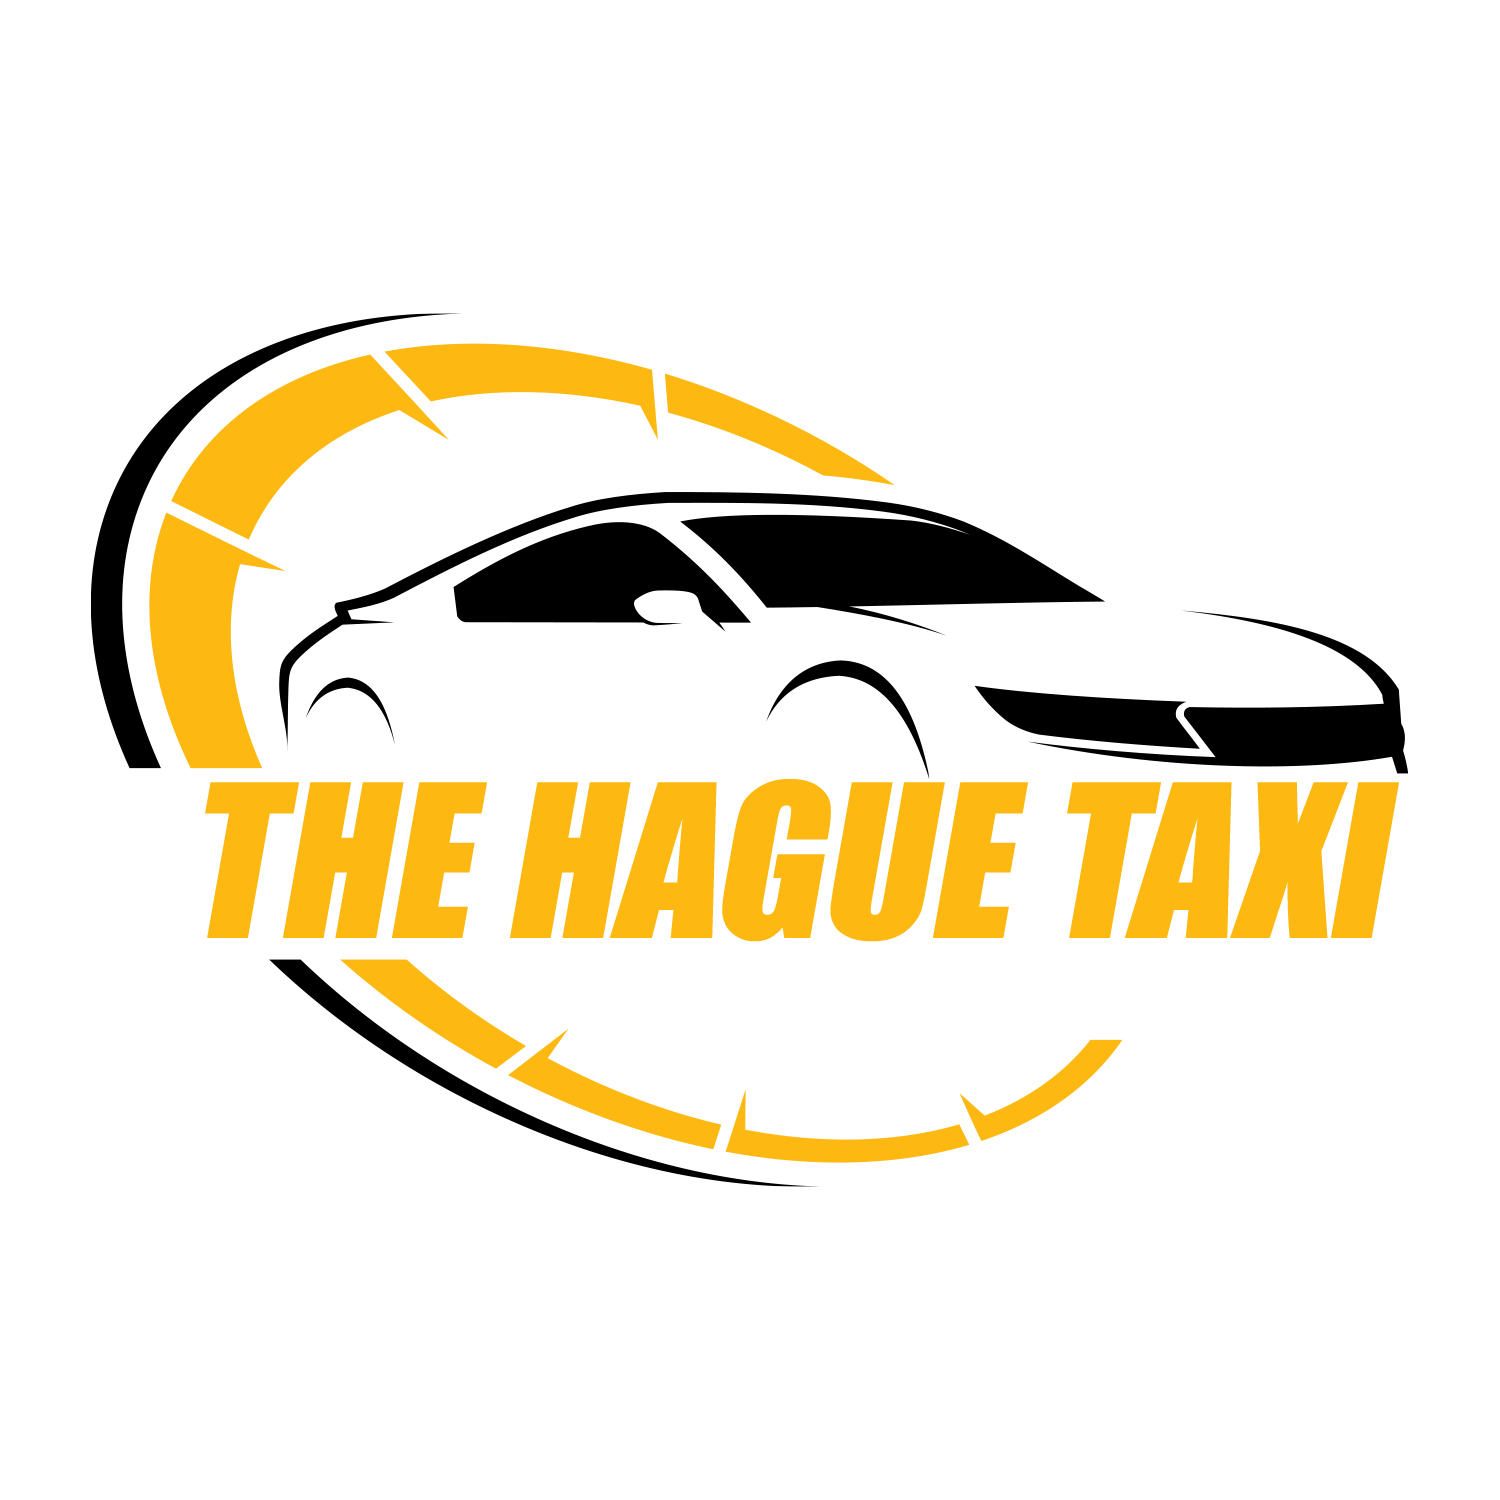 cropped taxi logo.png V3